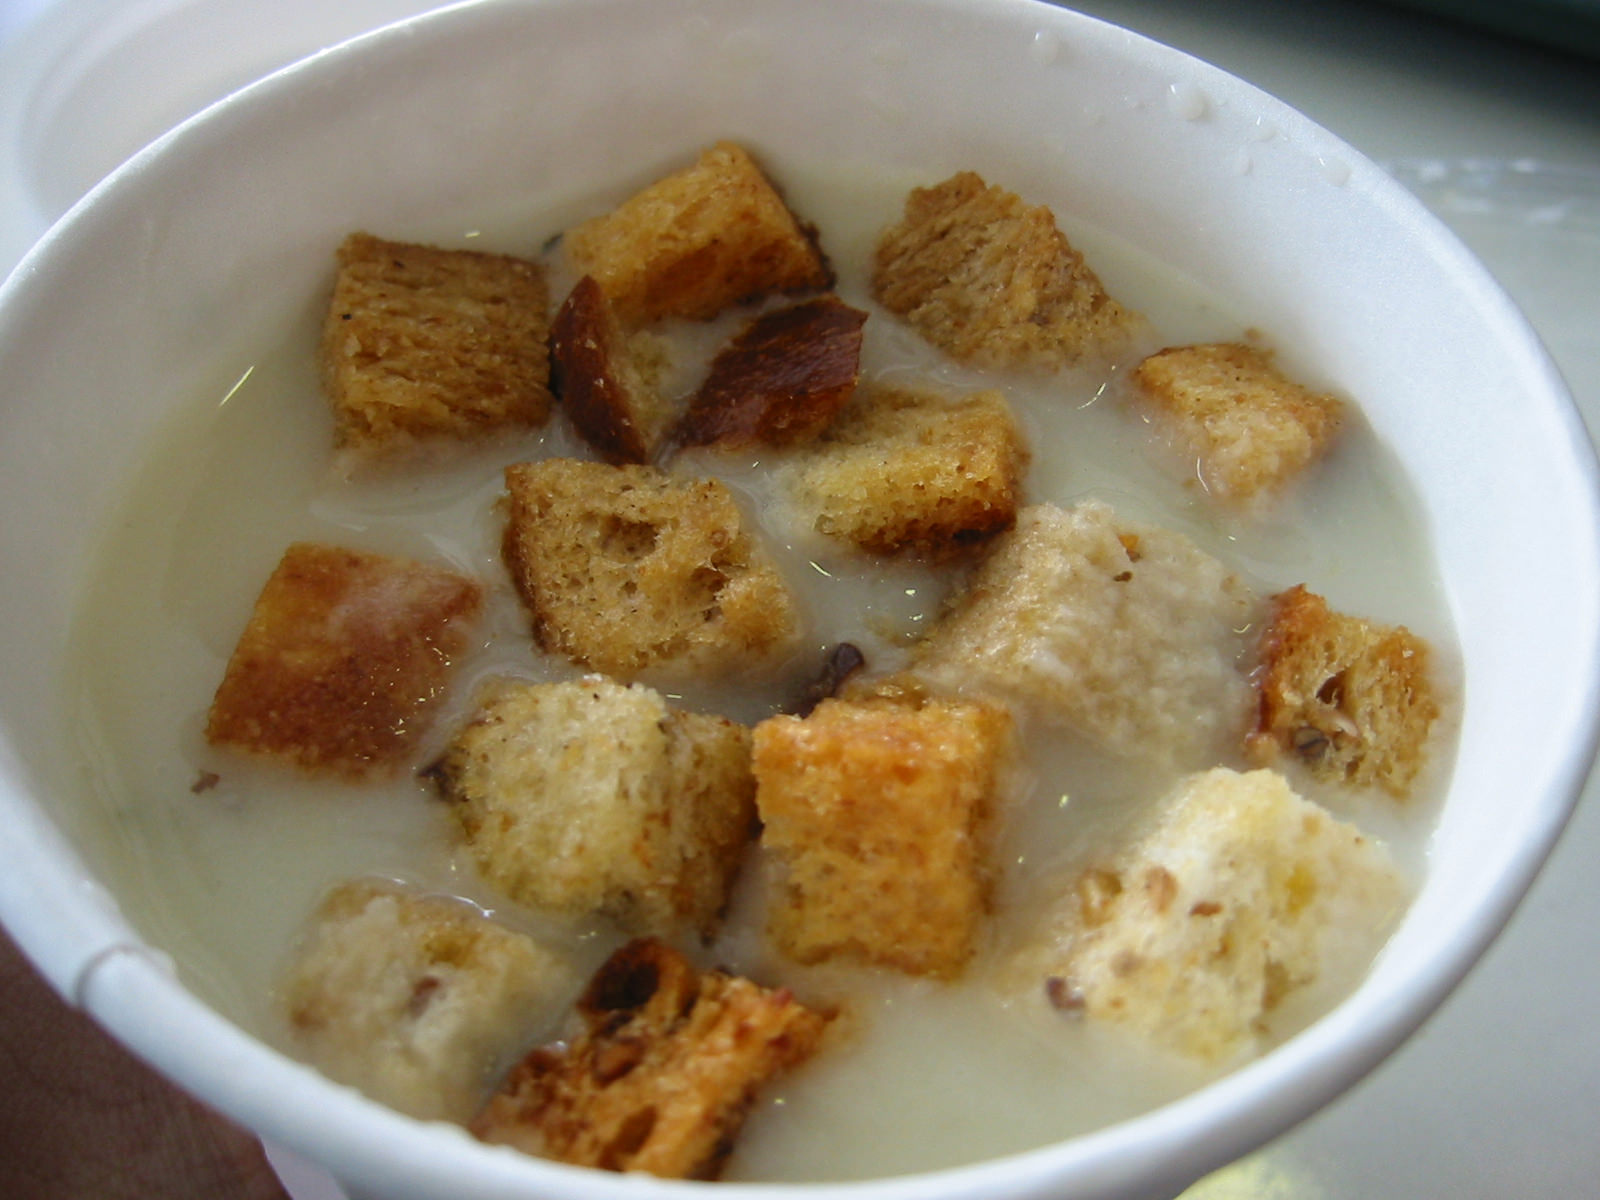 Potato and leek soup with lots of croutons